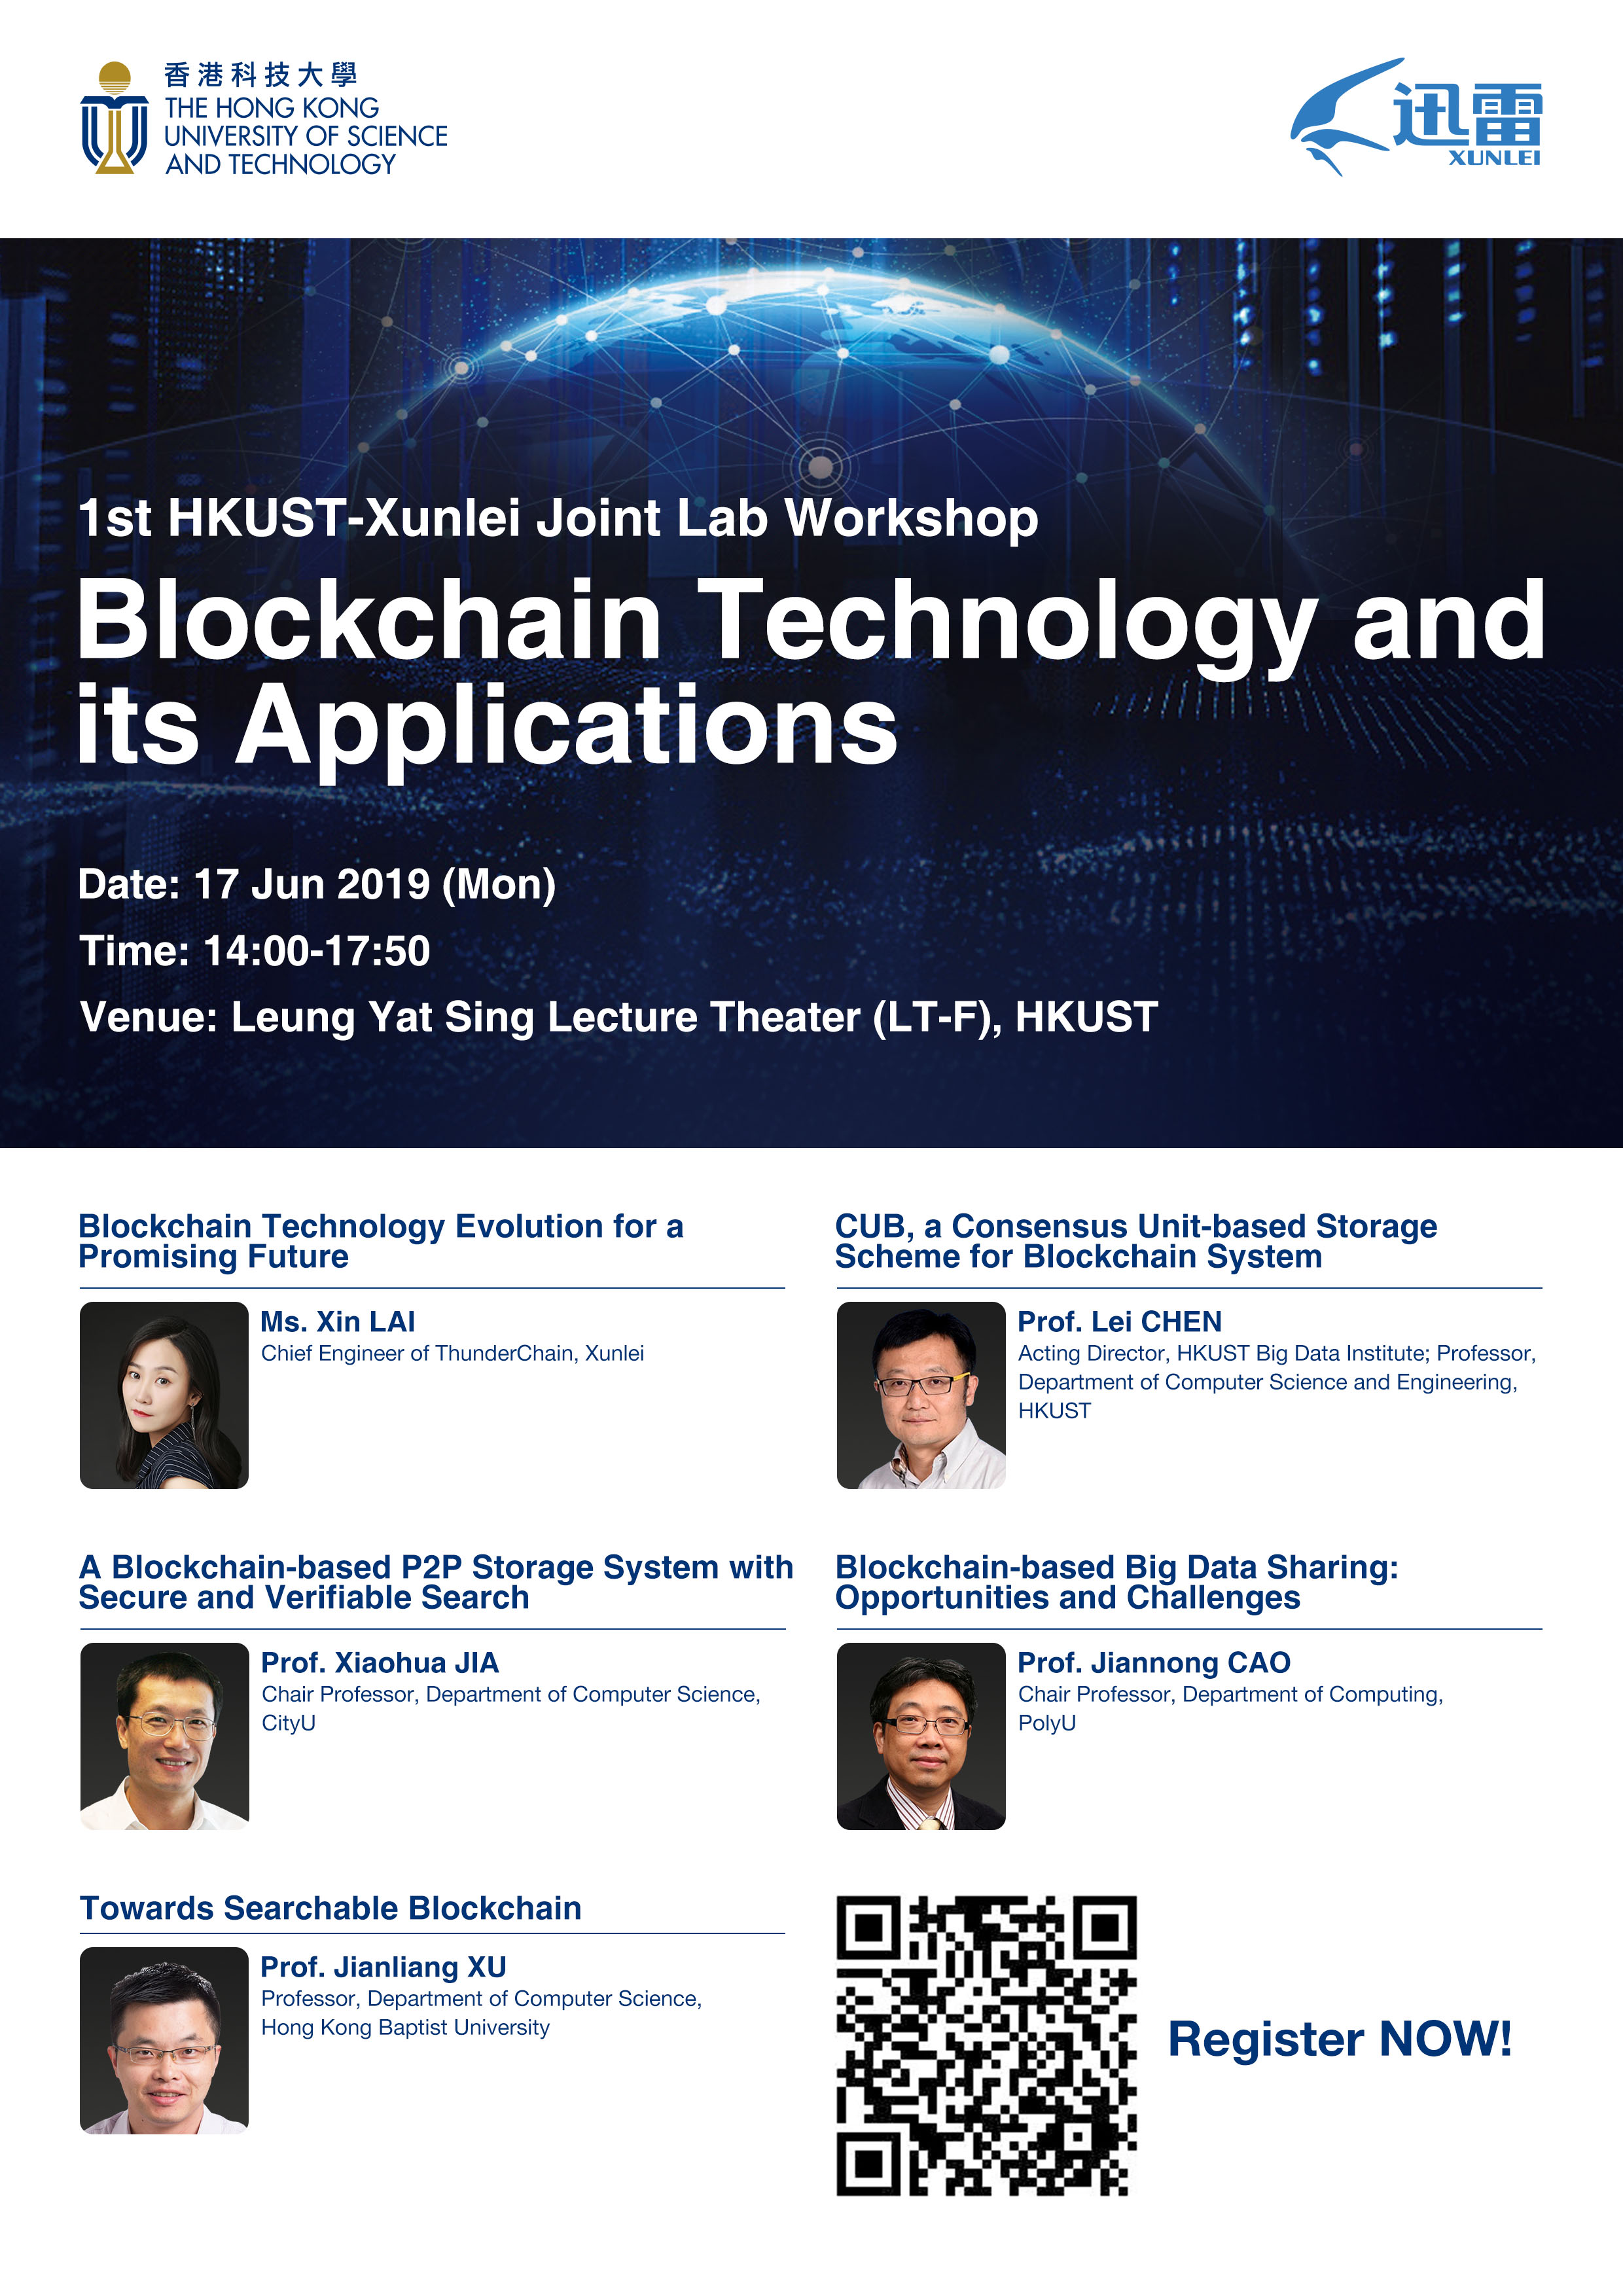 1st HKUST-Xunlei Joint Lab Workshop on Blockchain Technology and its Applications on 17 June 2019